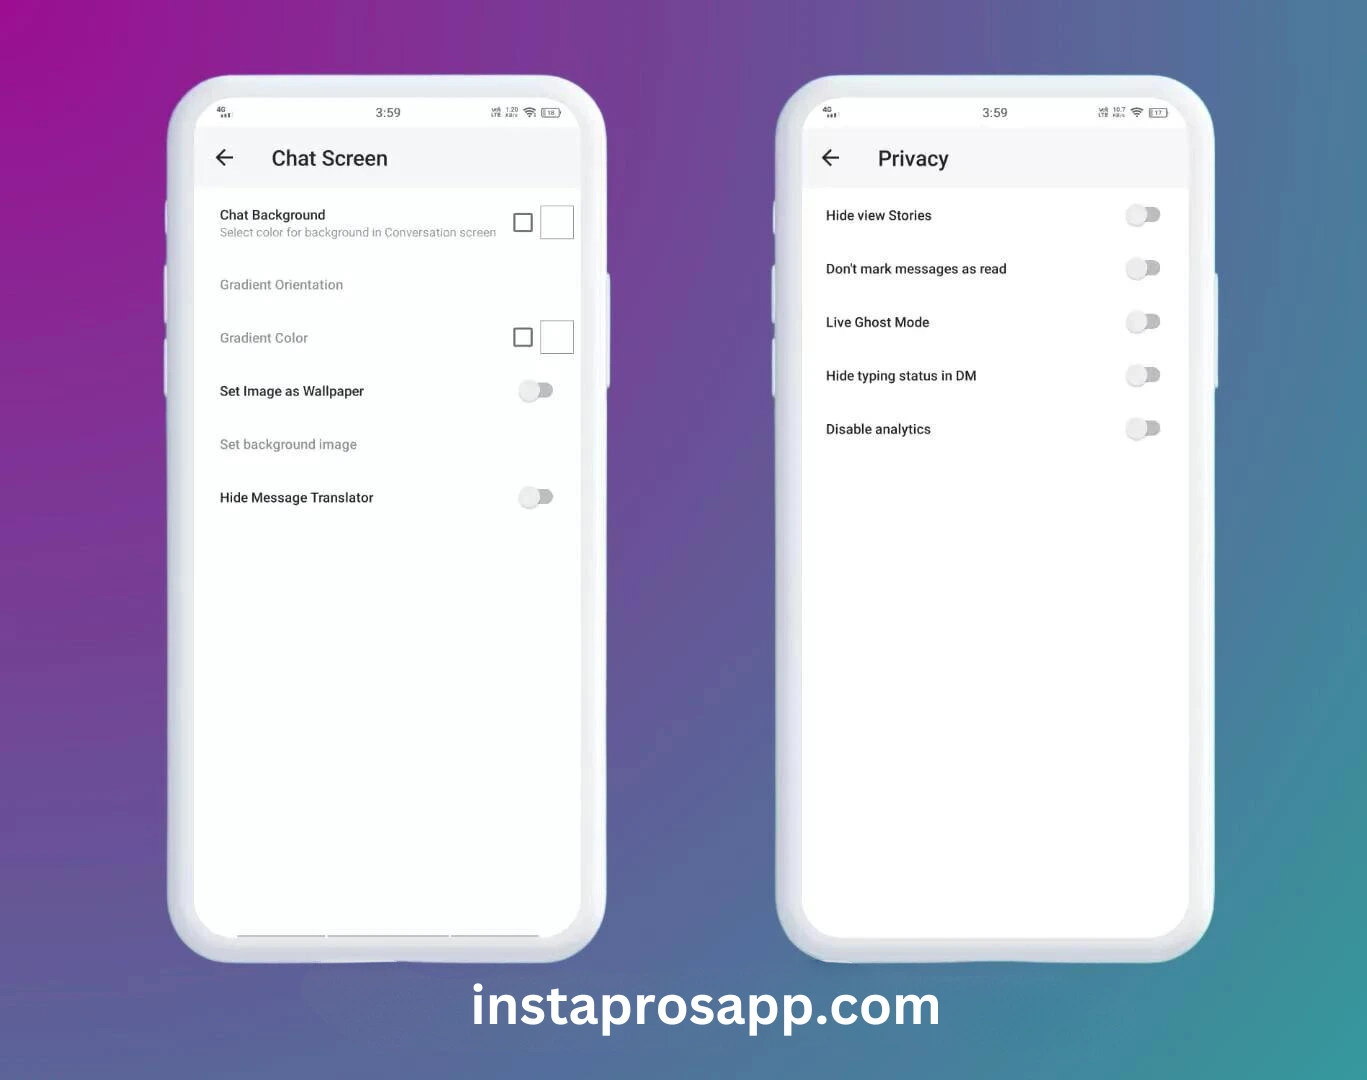 Instagram Pro Apk with the privacy and chat